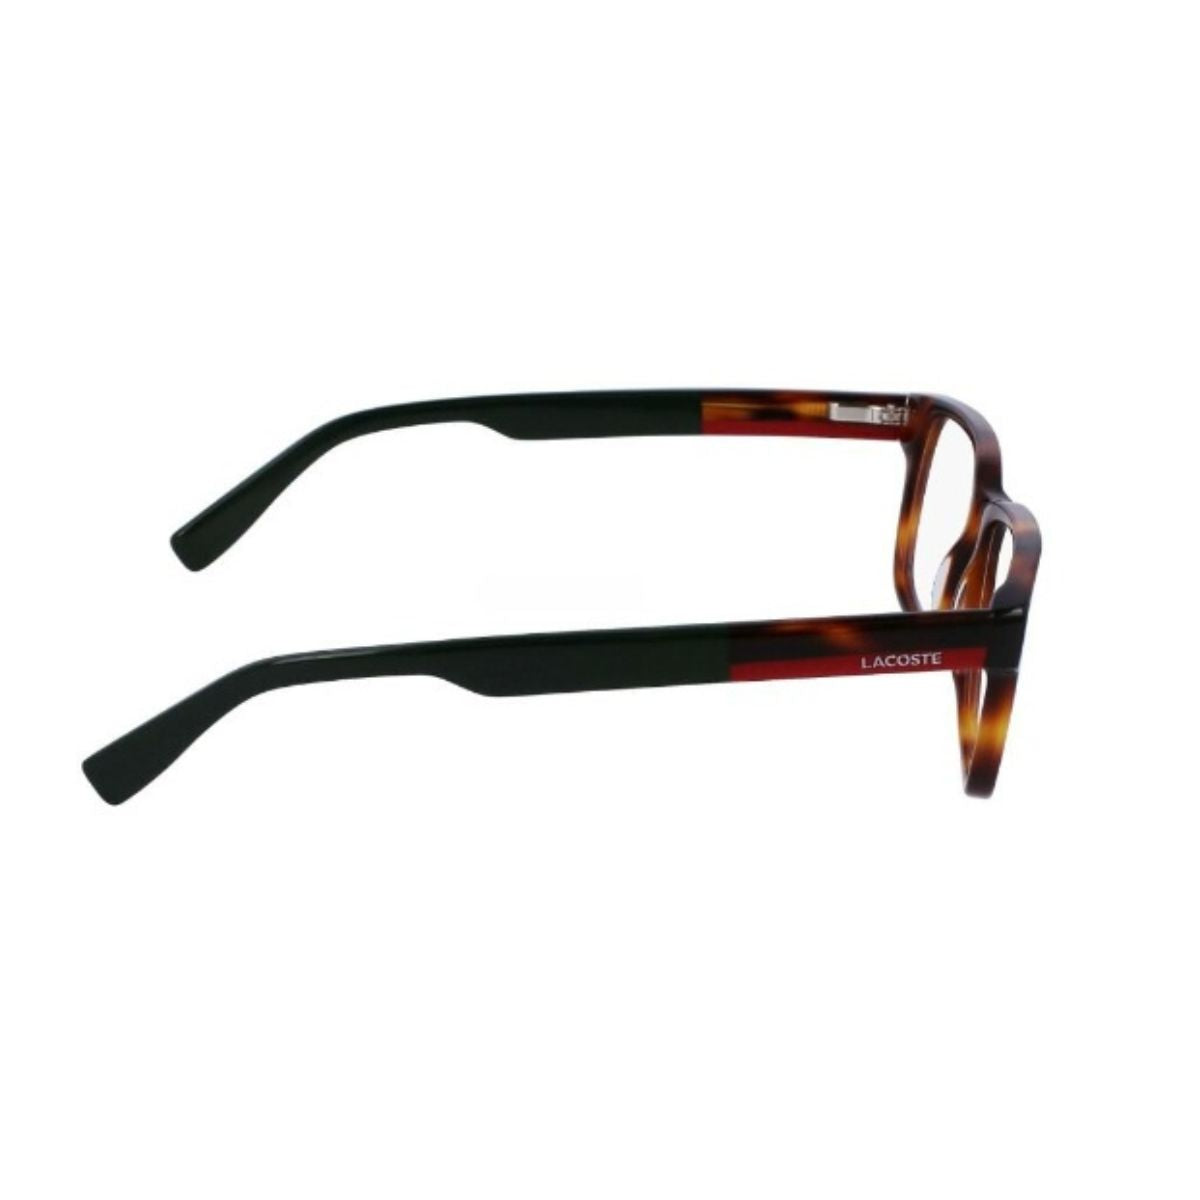 "Lacoste 2910 240 spactacle frame for men and women online at optorium"